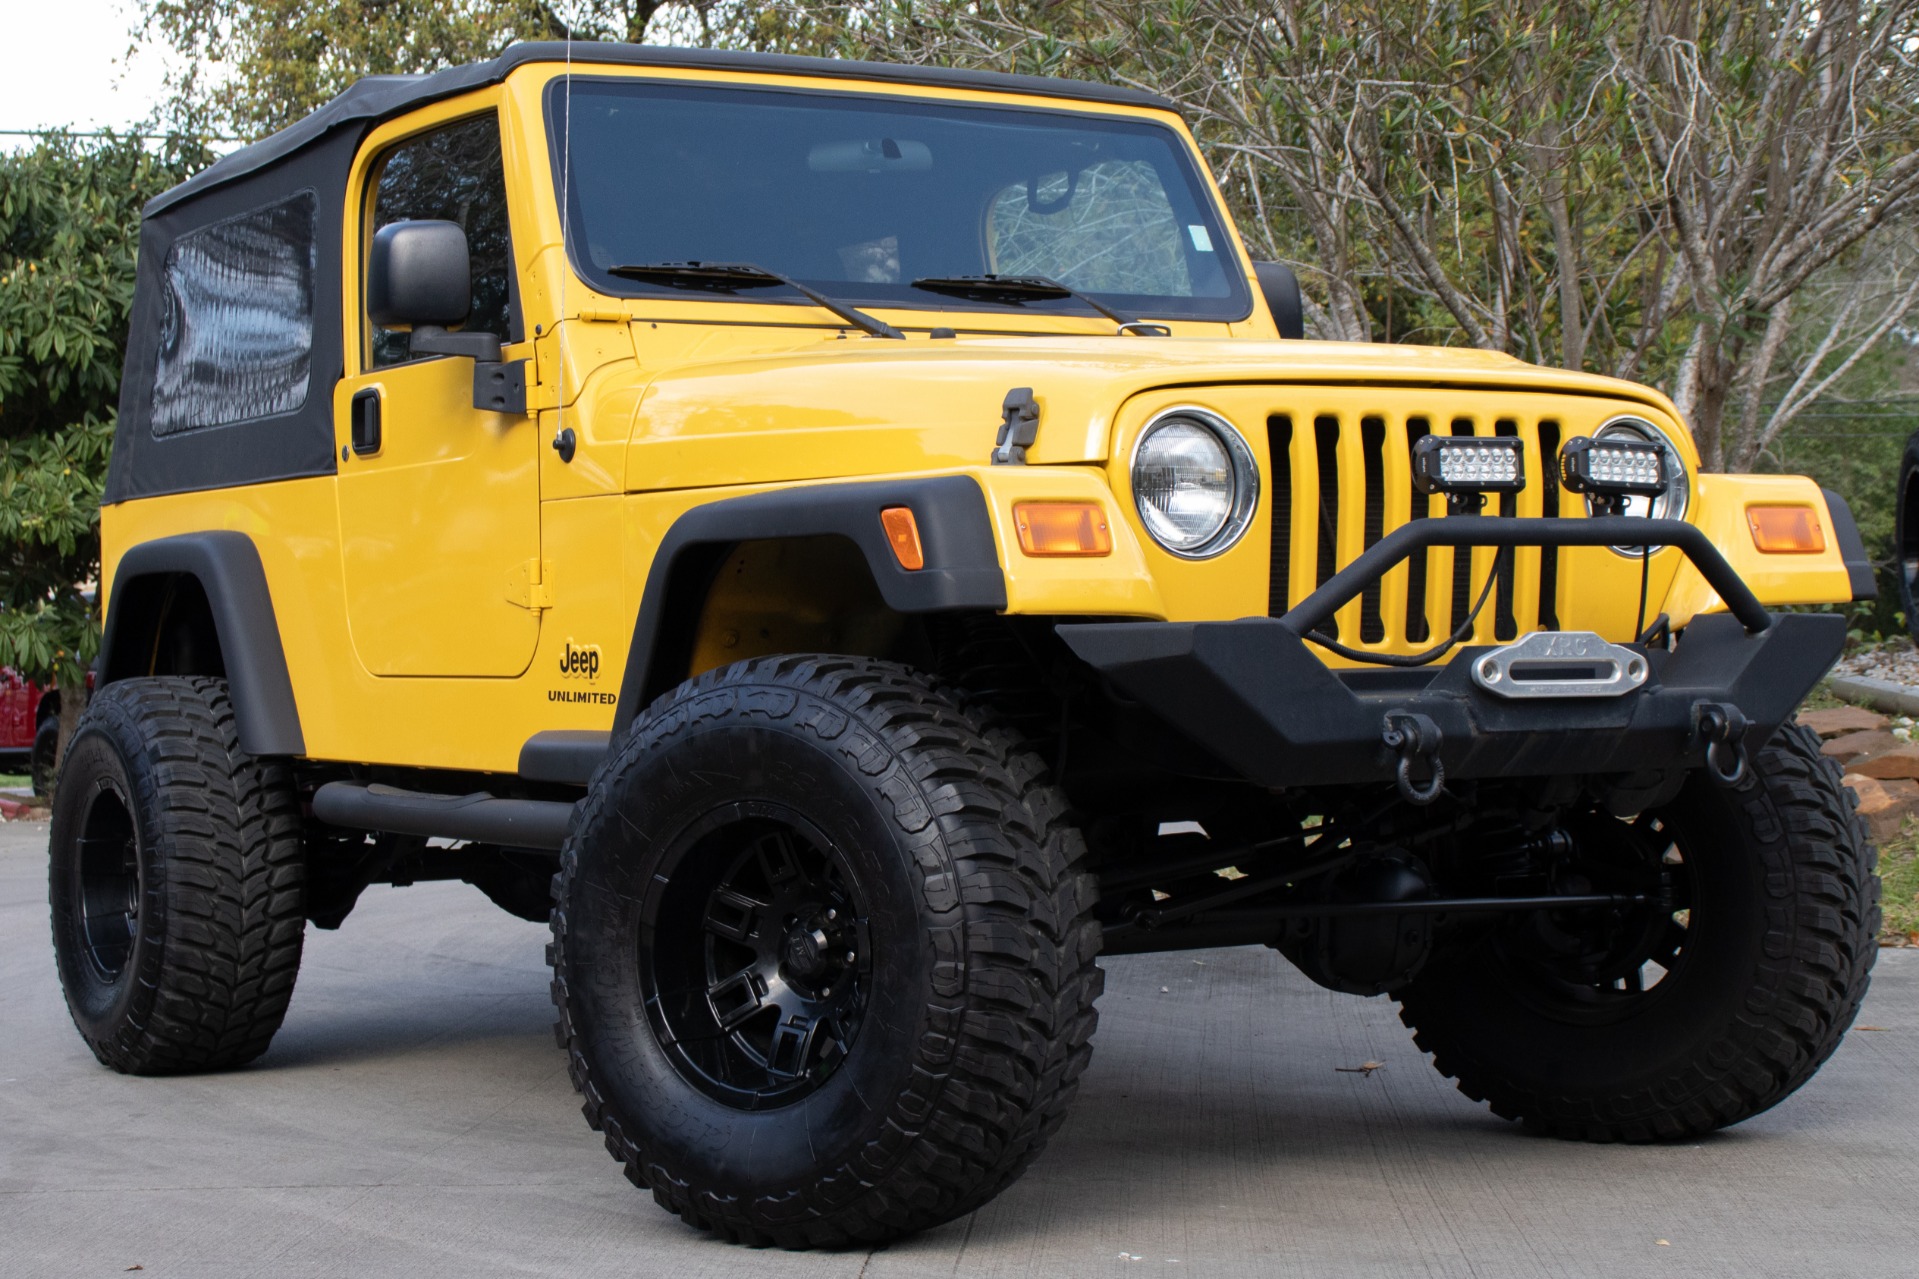 Used 2006 Jeep Wrangler Unlimited For Sale ($26,995) | Select Jeeps Inc.  Stock #748424